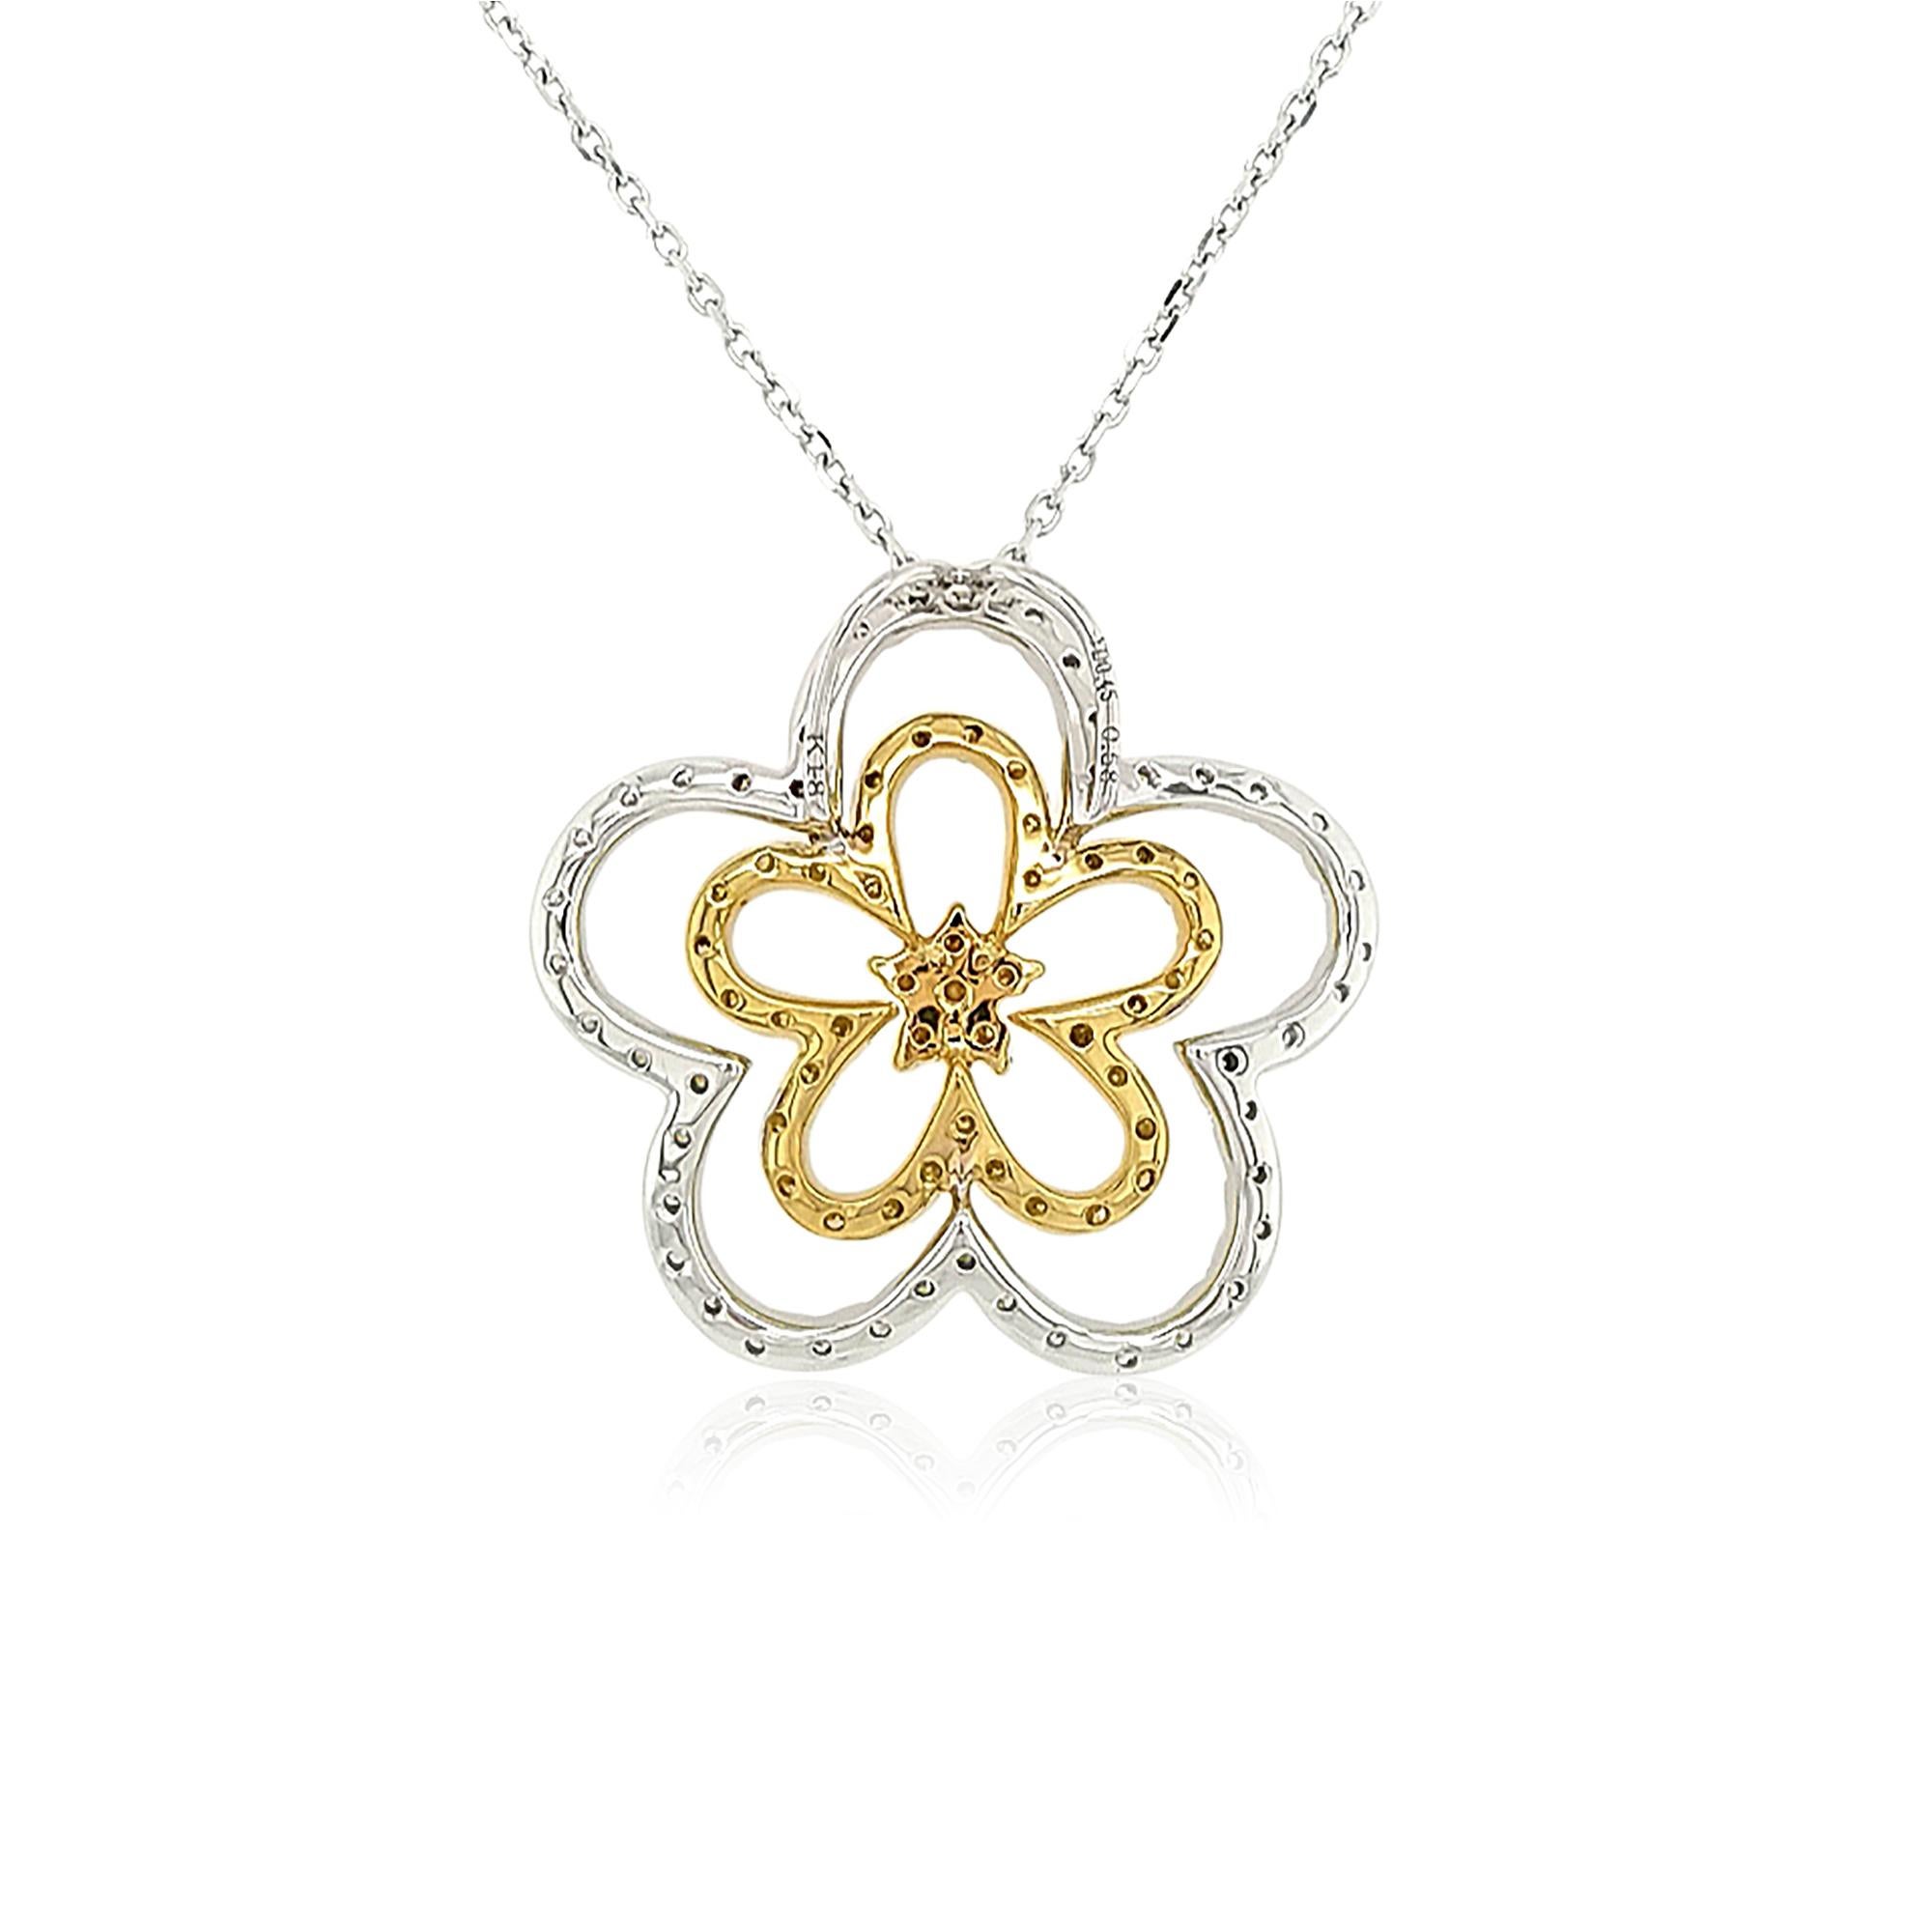 This unique 18K gold pendant features lustrous Yellow diamonds set amongst a floral motif of White diamonds. The diamonds intertwine to create two abstract flowers. A romantic, but striking piece, this beautiful pendant will add an exceptional